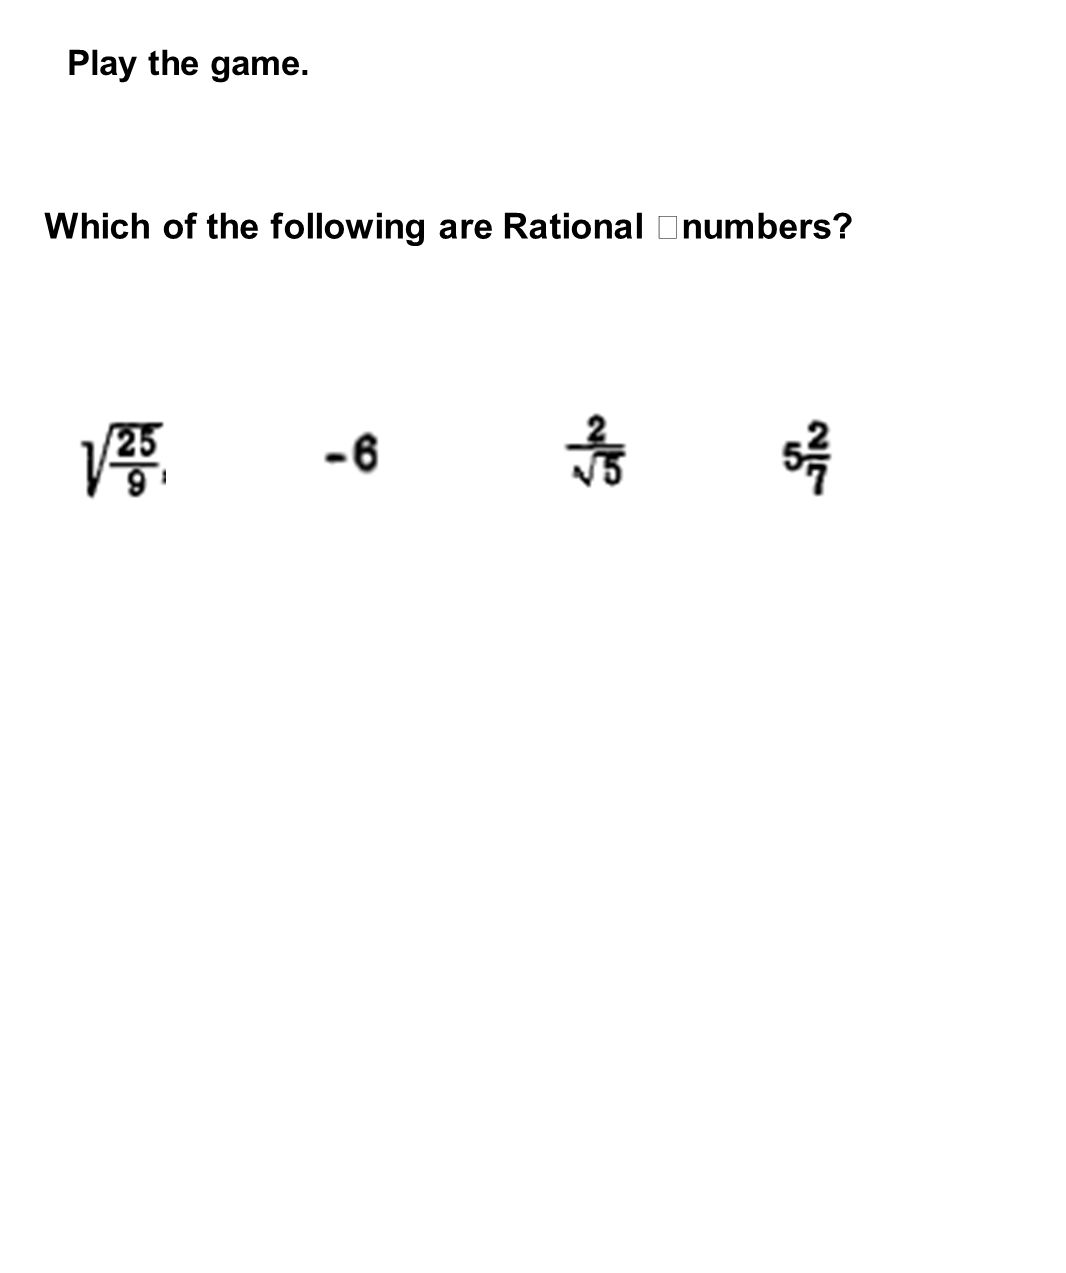 Play the game. Which of the following are Rational numbers